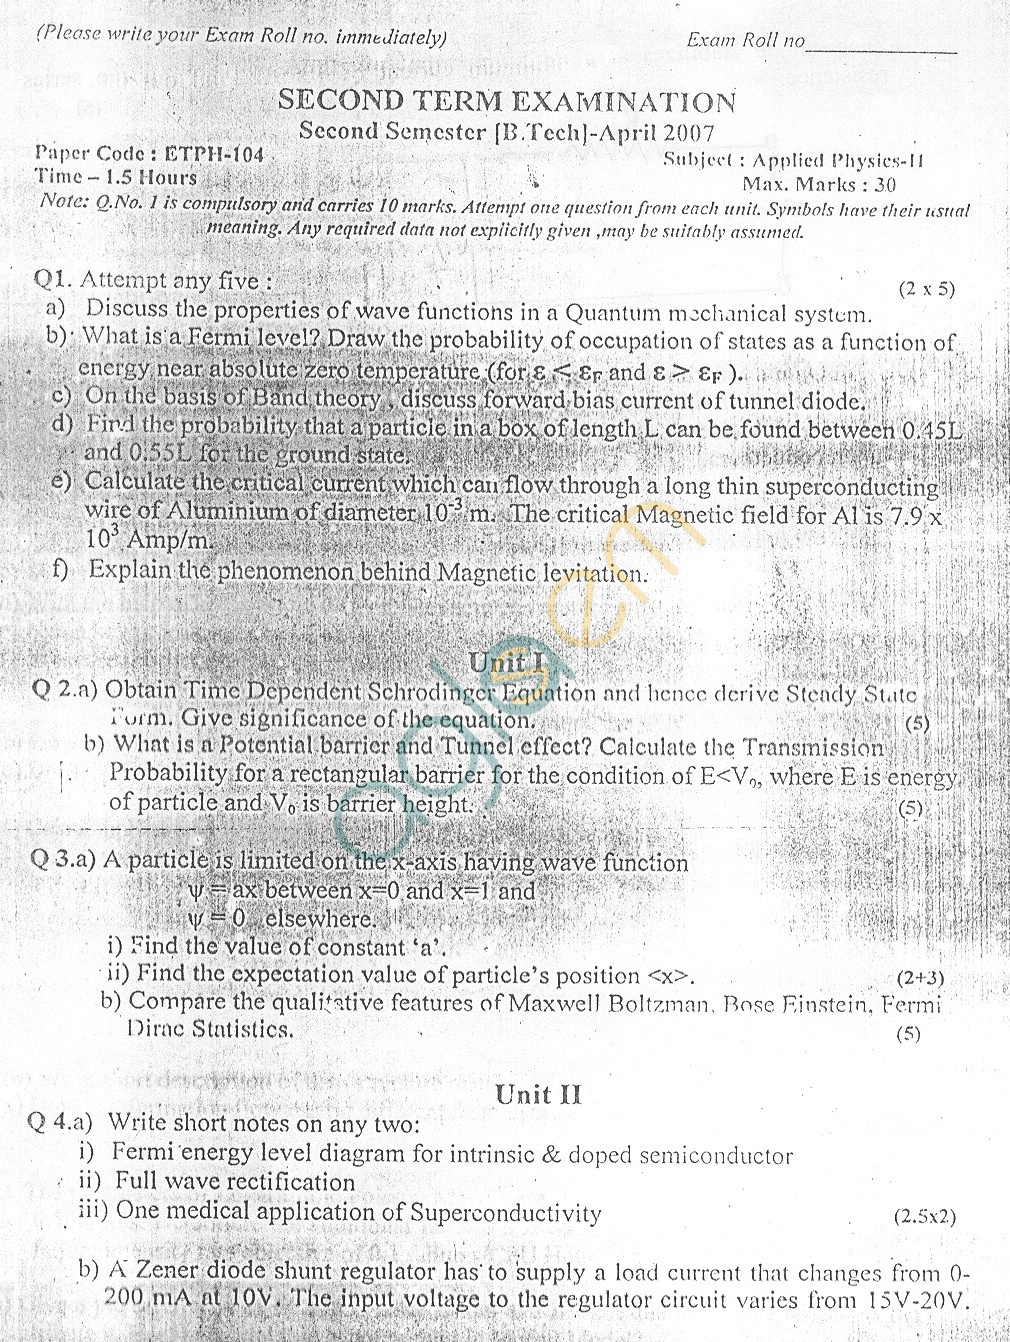 GGSIPU Question Papers Second Semester – Second Term 2007 – ETPH-104